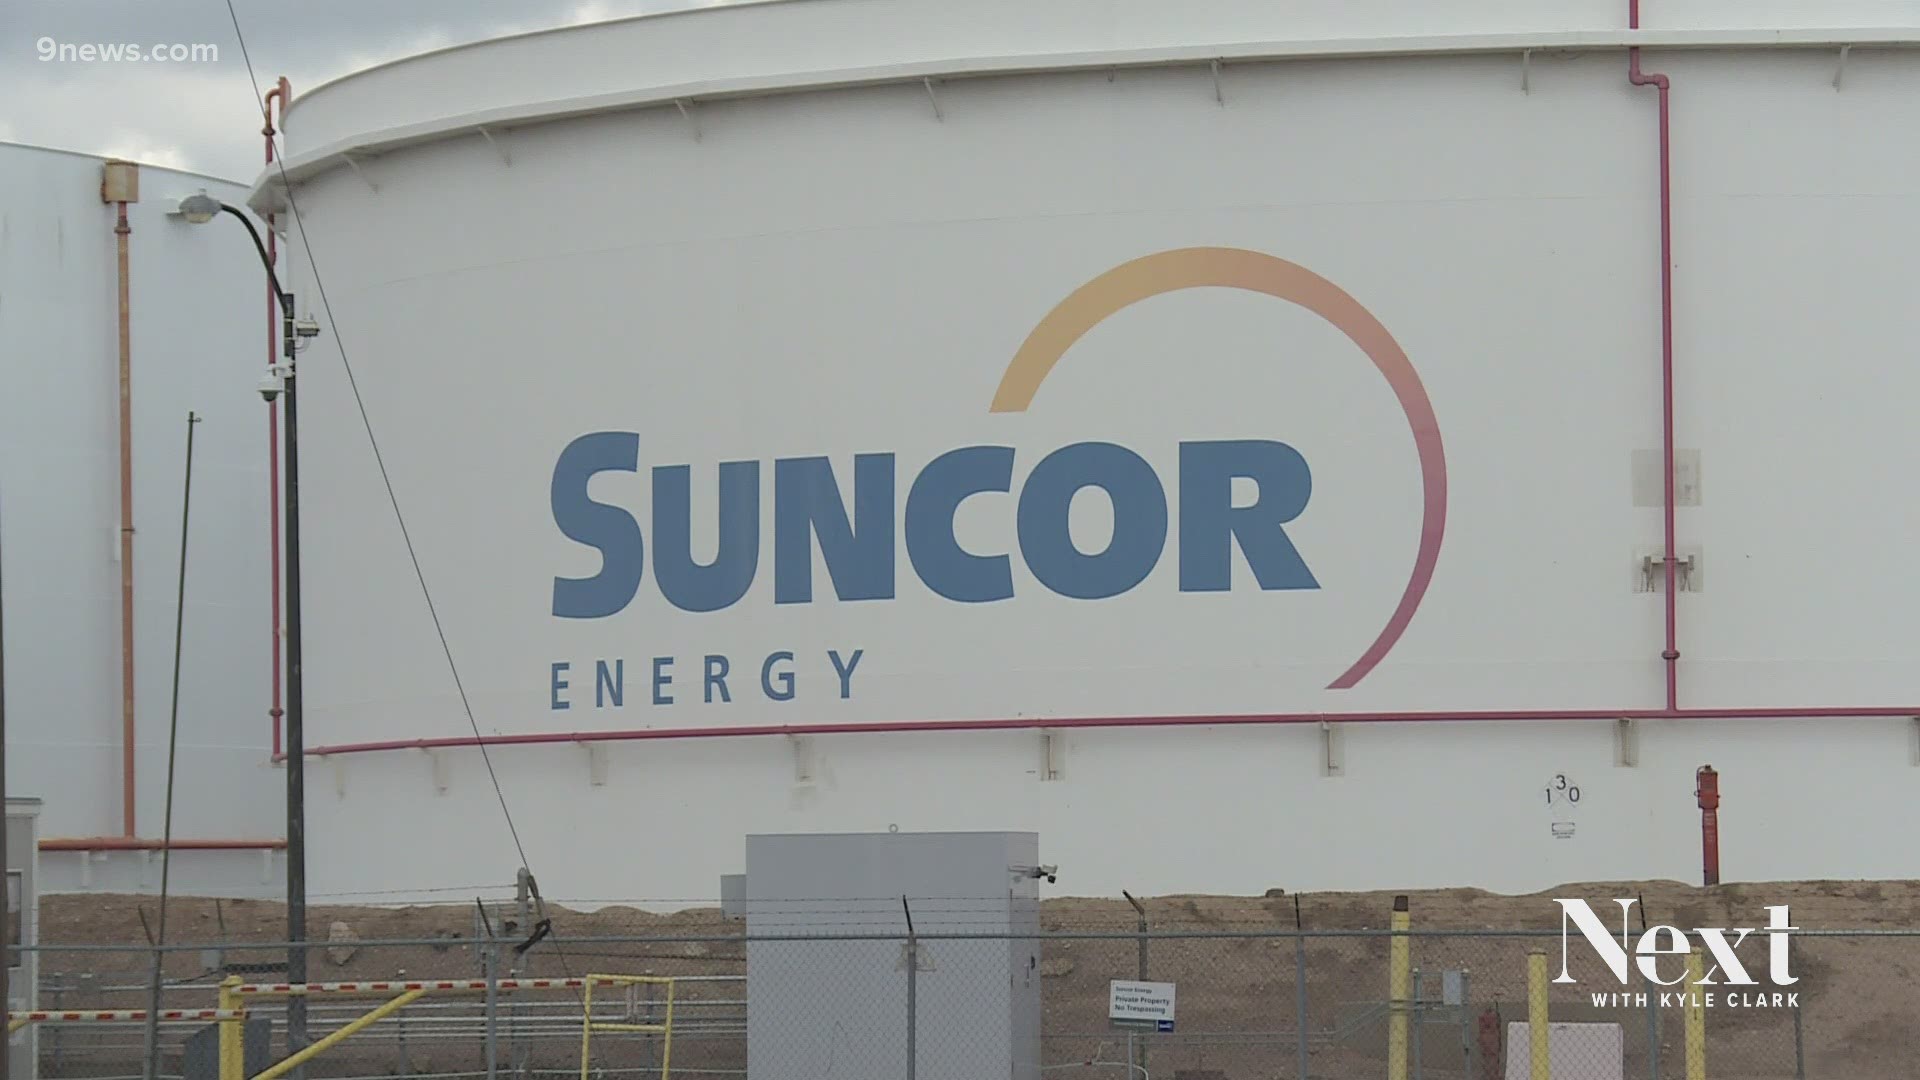 Suncor, a repeated polluter in Denver, wants permission to increase certain types of pollution.
Some neighbors are angry, though it's not clear they can stop it.